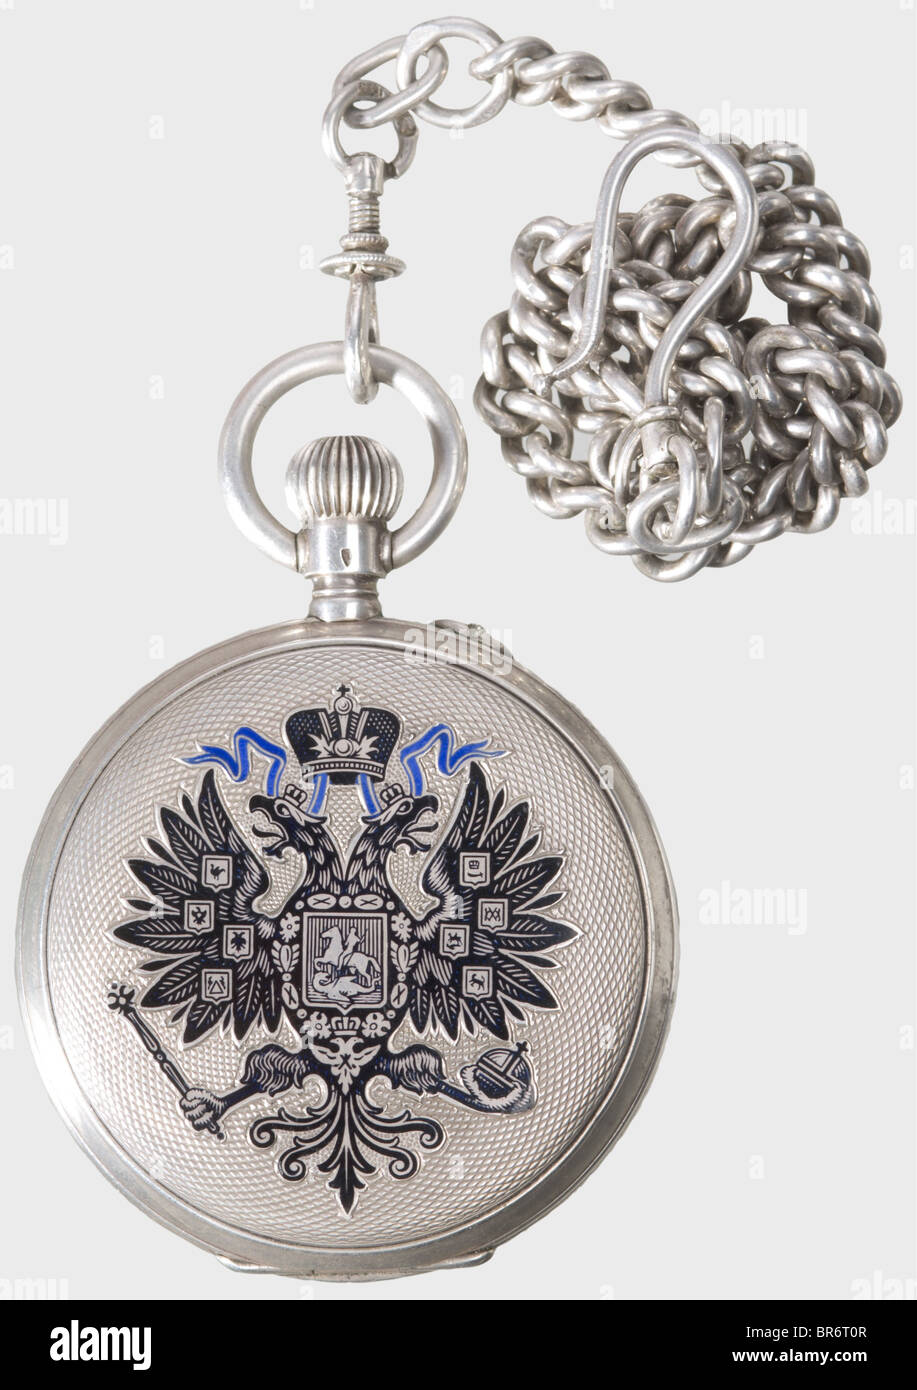 A silver savonette pocket watch with Imperial Russian double-headed eagle, Pavel Bure, Court Watch Maker to the Imperial House. The lid bears the Tsarist double-headed eagle partially enamelled in blue and black. White enamel dial with gold hands, black Roman and Arabic numerals, as well as small second. Working, jewelled precision movement. Engraved on the back with serial number '332884', and mark of fineness '84'. Silver watch chain. In red leather case with a gilt eagle on the lid. The makers mark is stamped in silver on the silk lining. historic, historica, Stock Photo